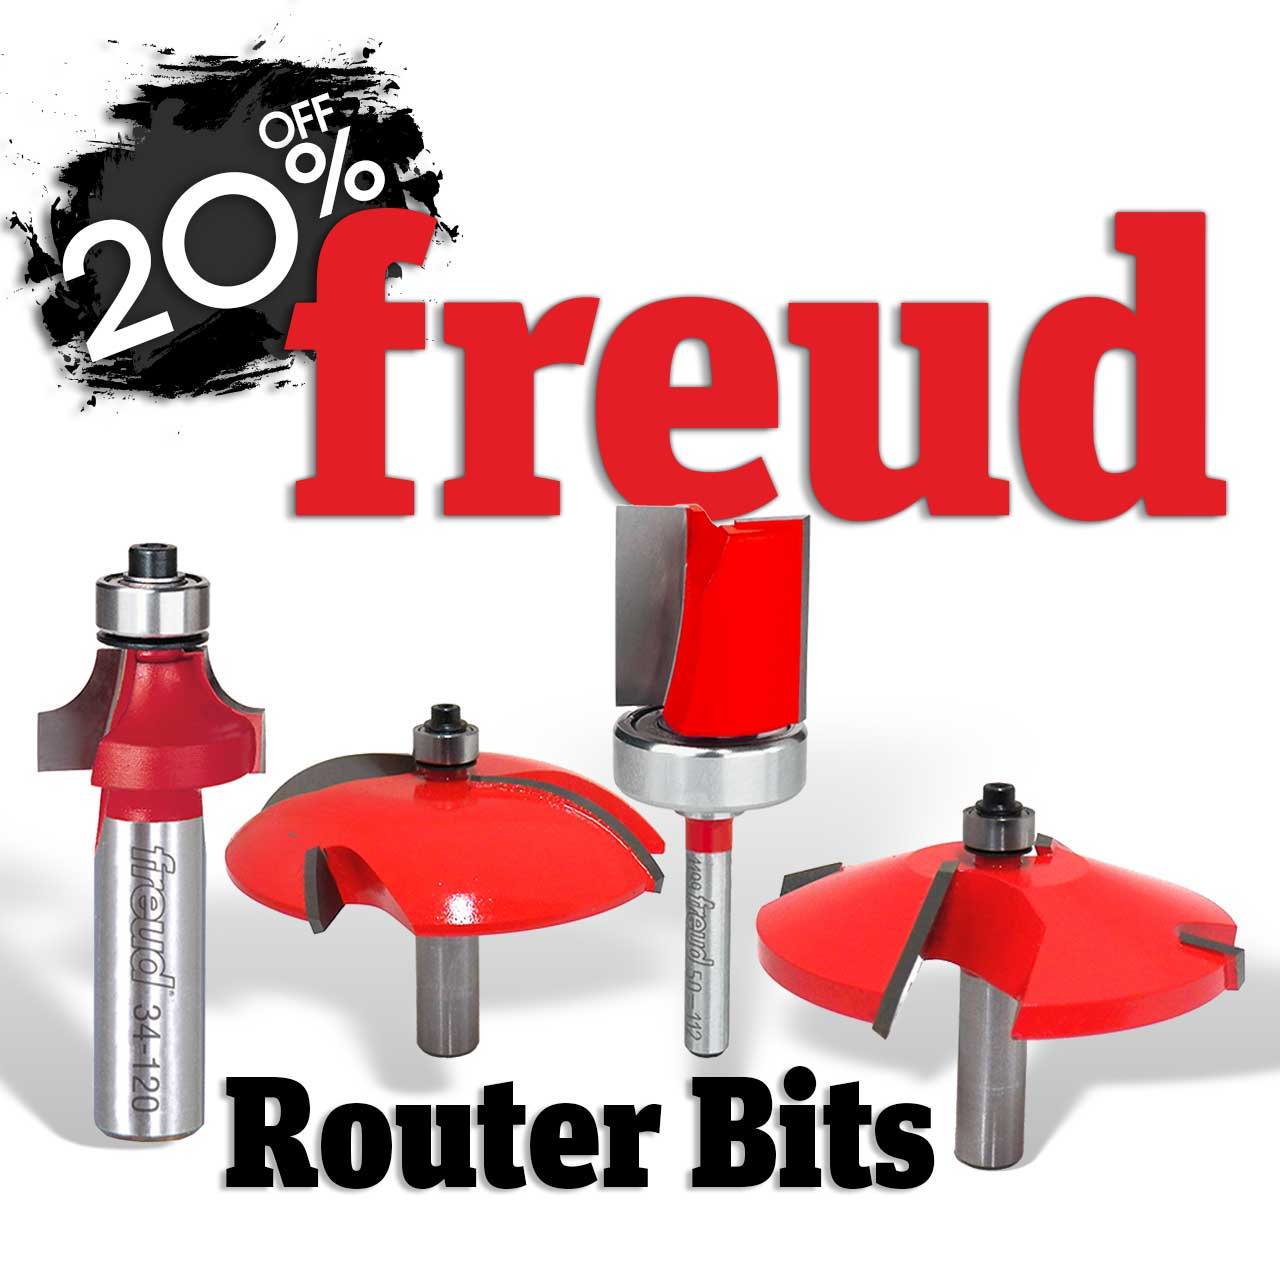 15% Off Freud Router Bits